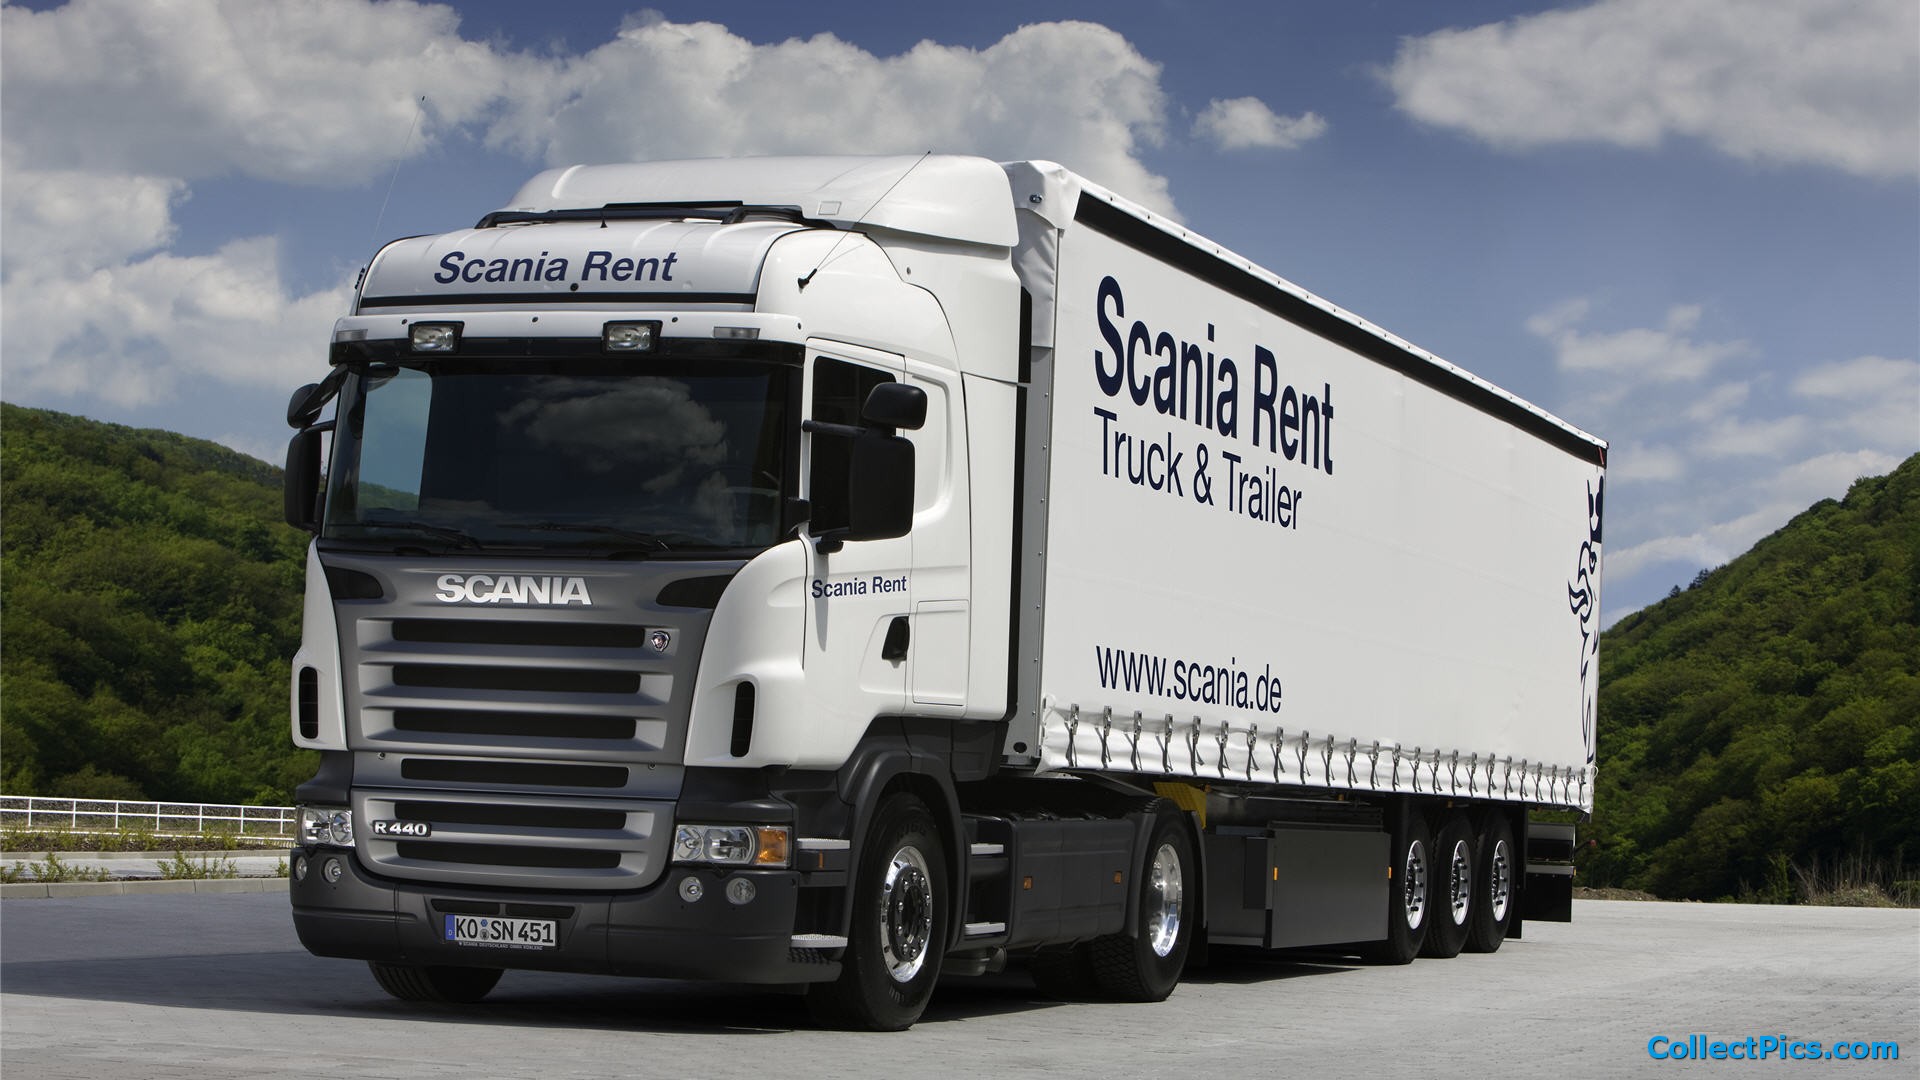 Related Search Scania Truck Trucks